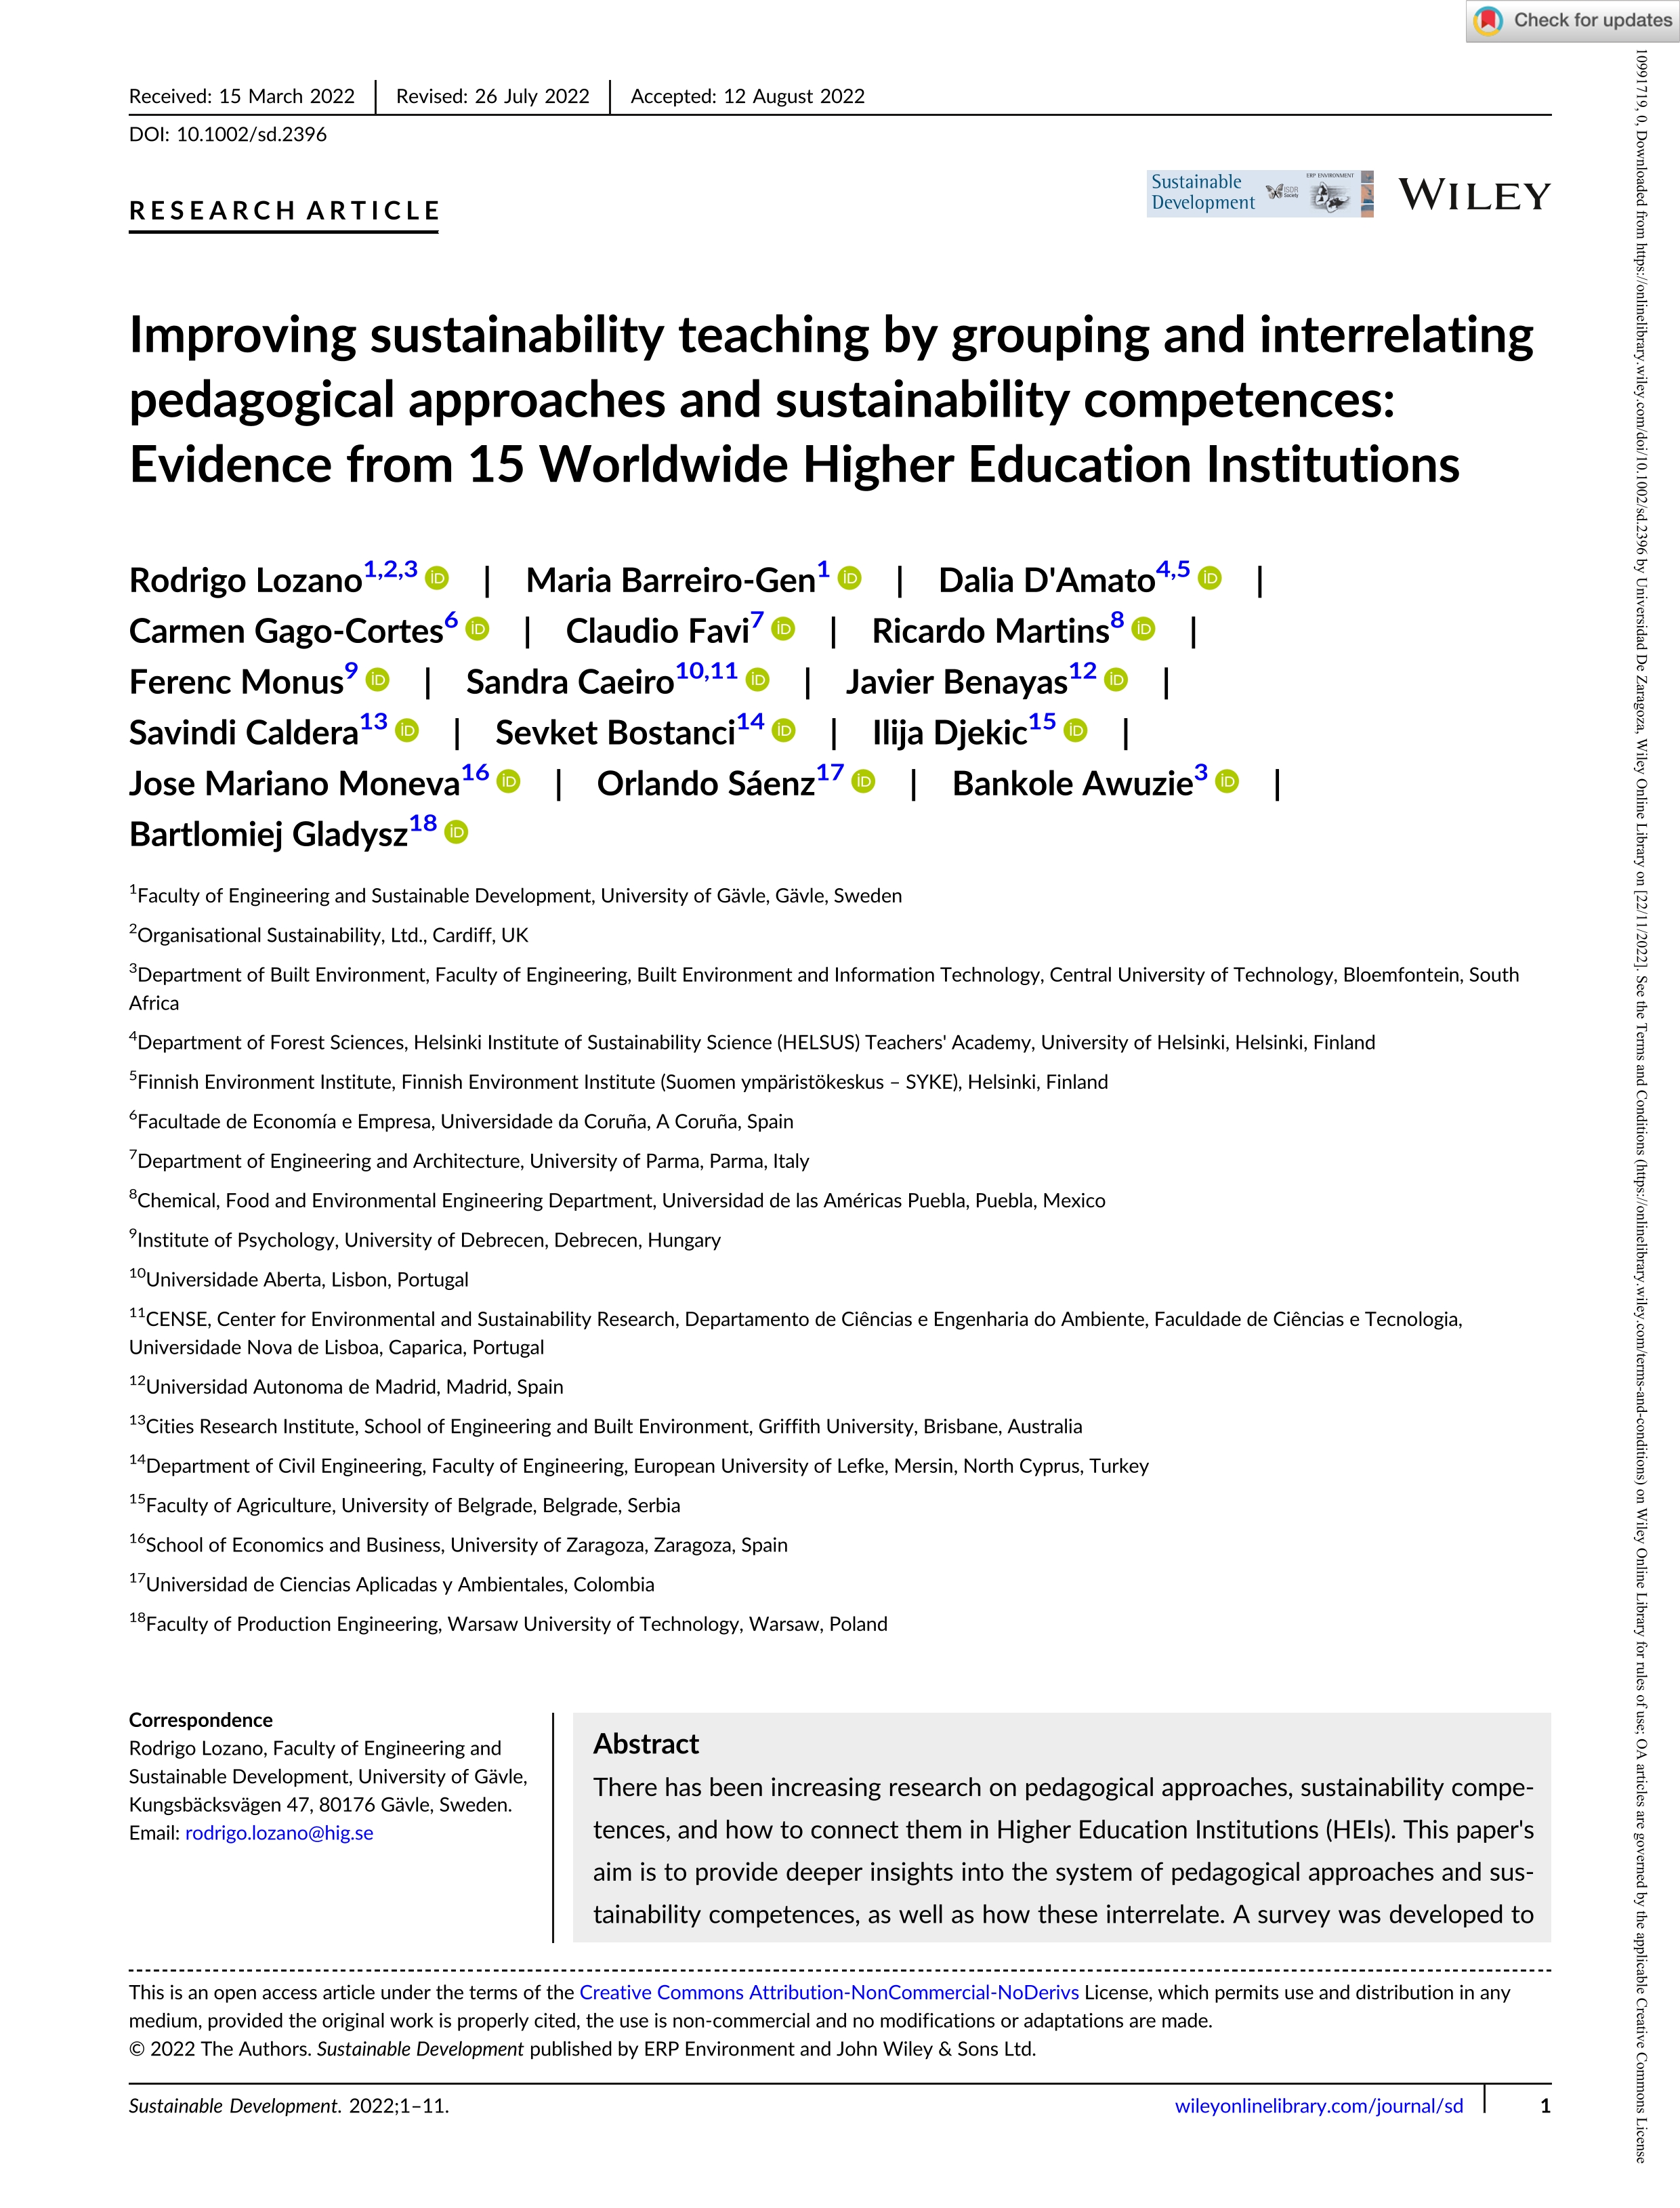 Improving sustainability teaching by grouping and interrelating pedagogical approaches and sustainability competences: Evidence from 15 Worldwide Higher Education Institutions